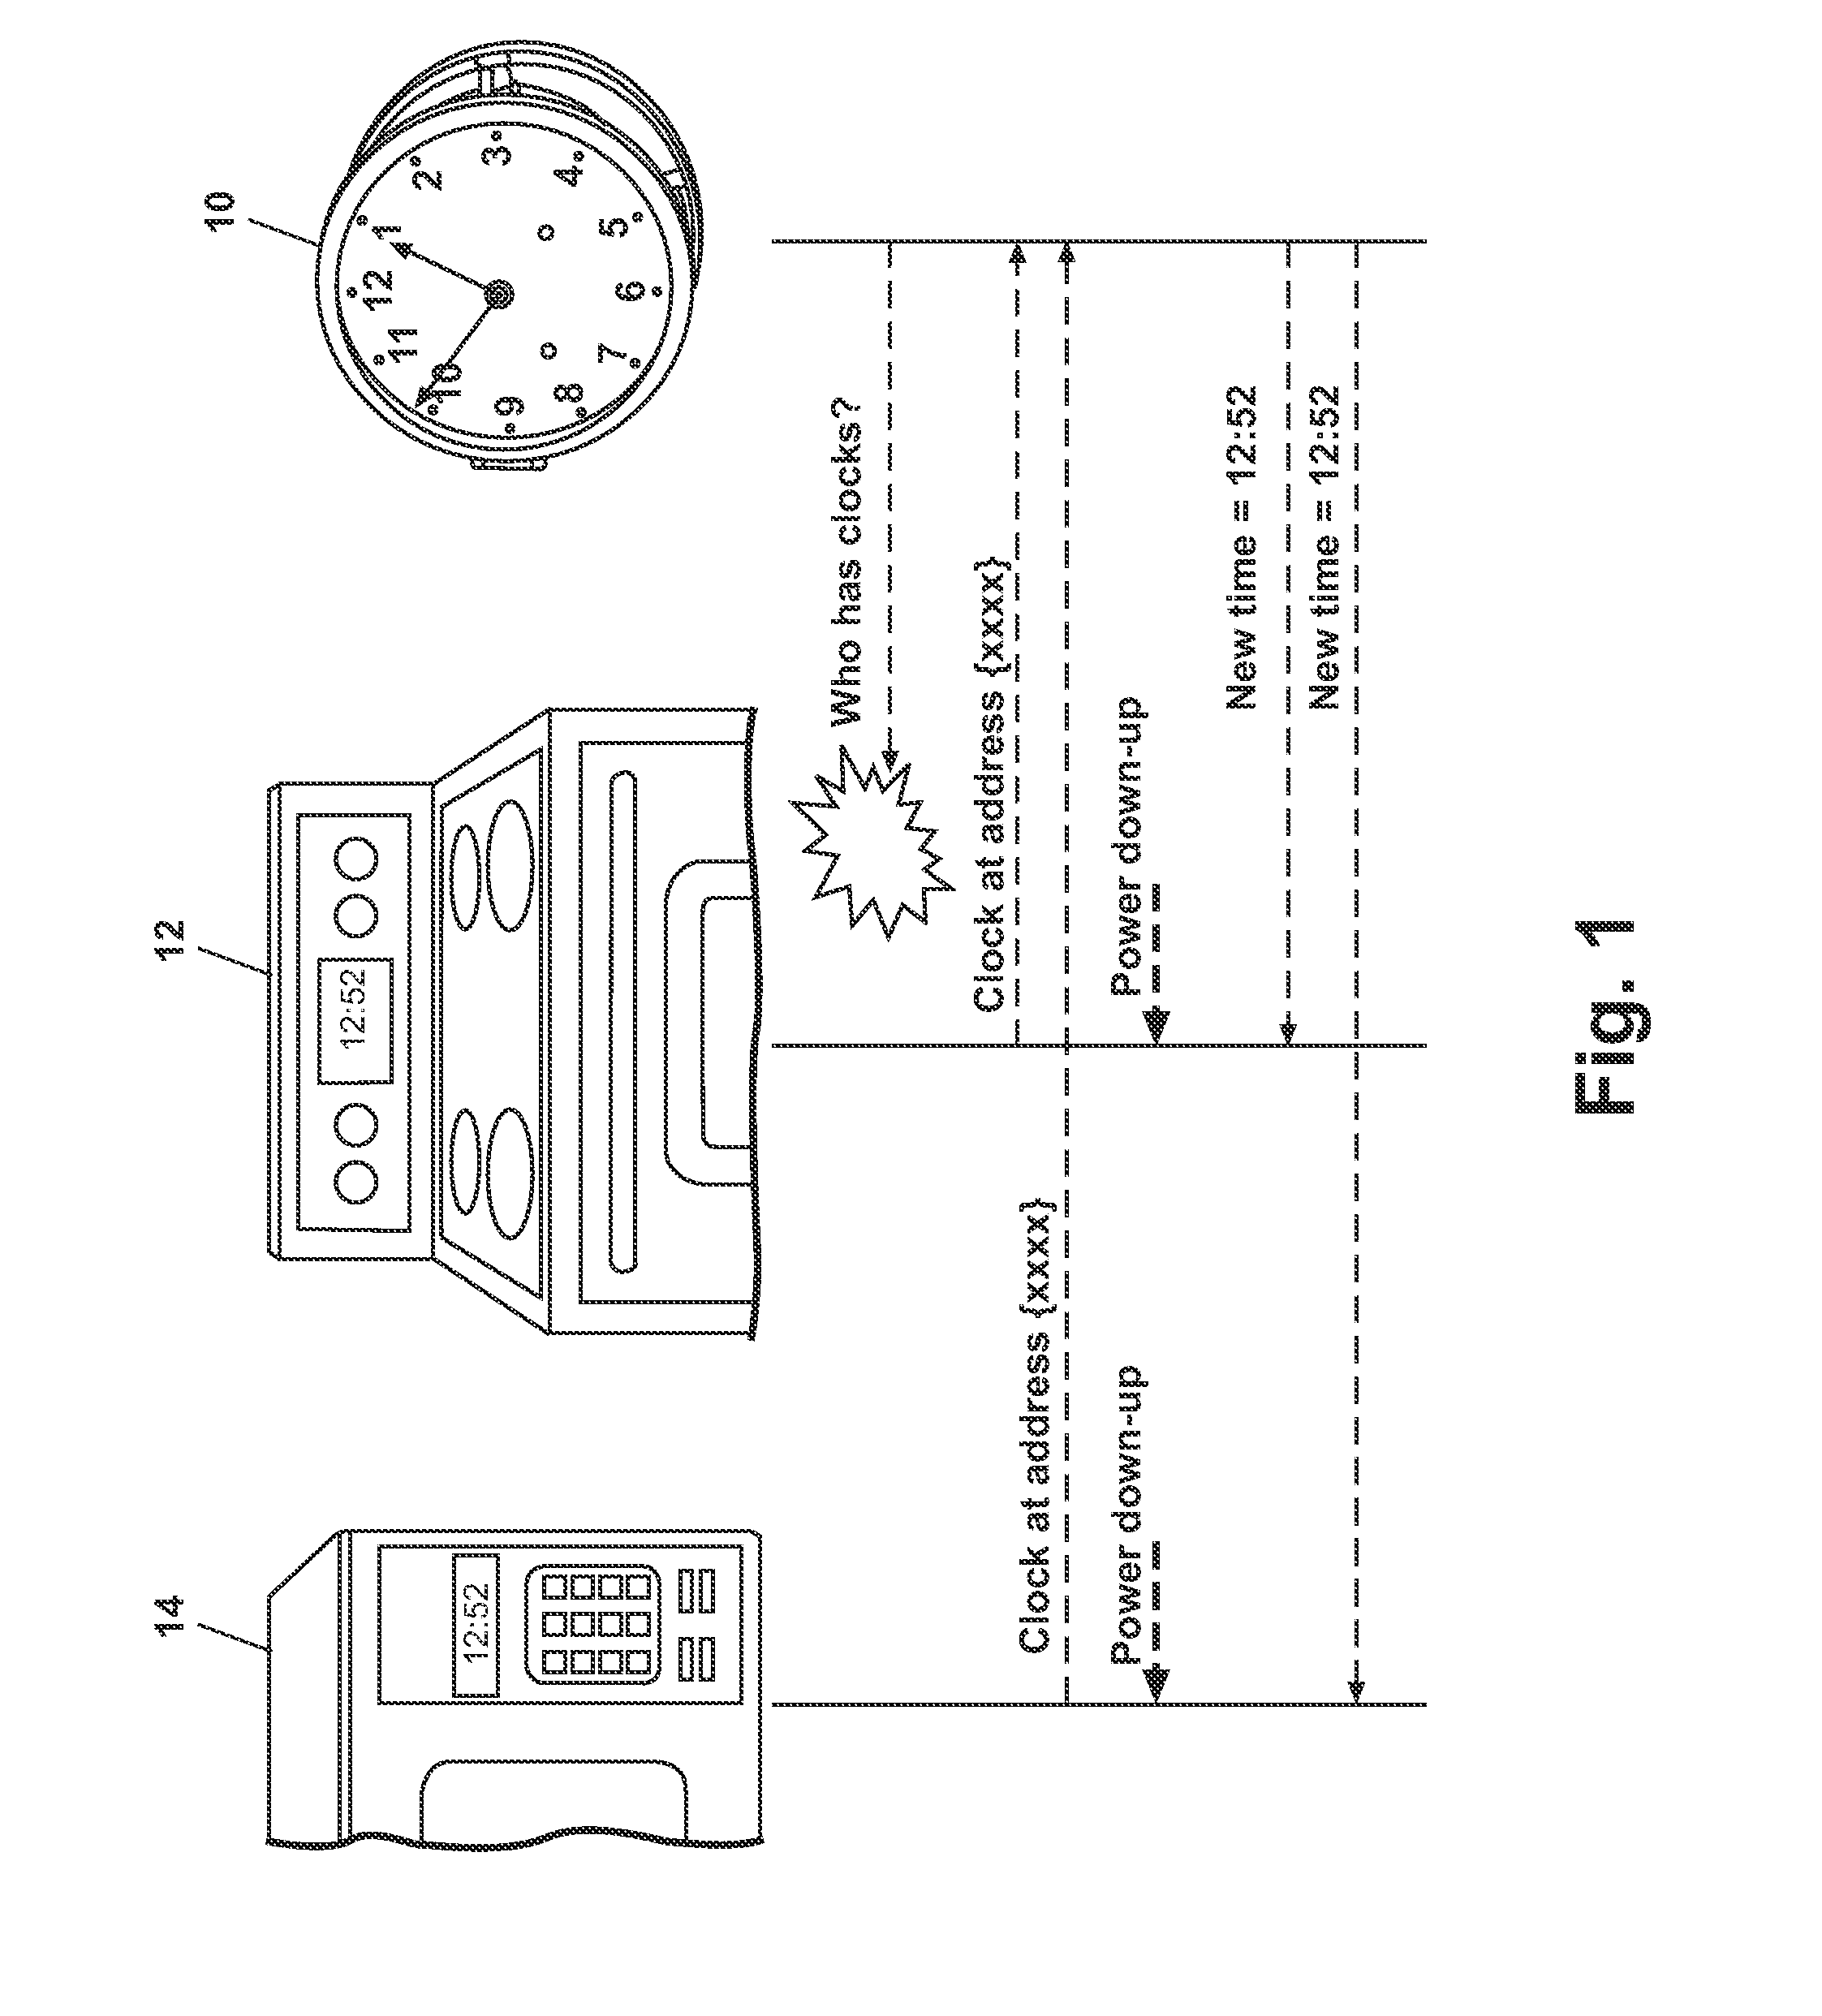 Appliance network for a networked appliance and a cooking sensor accessory